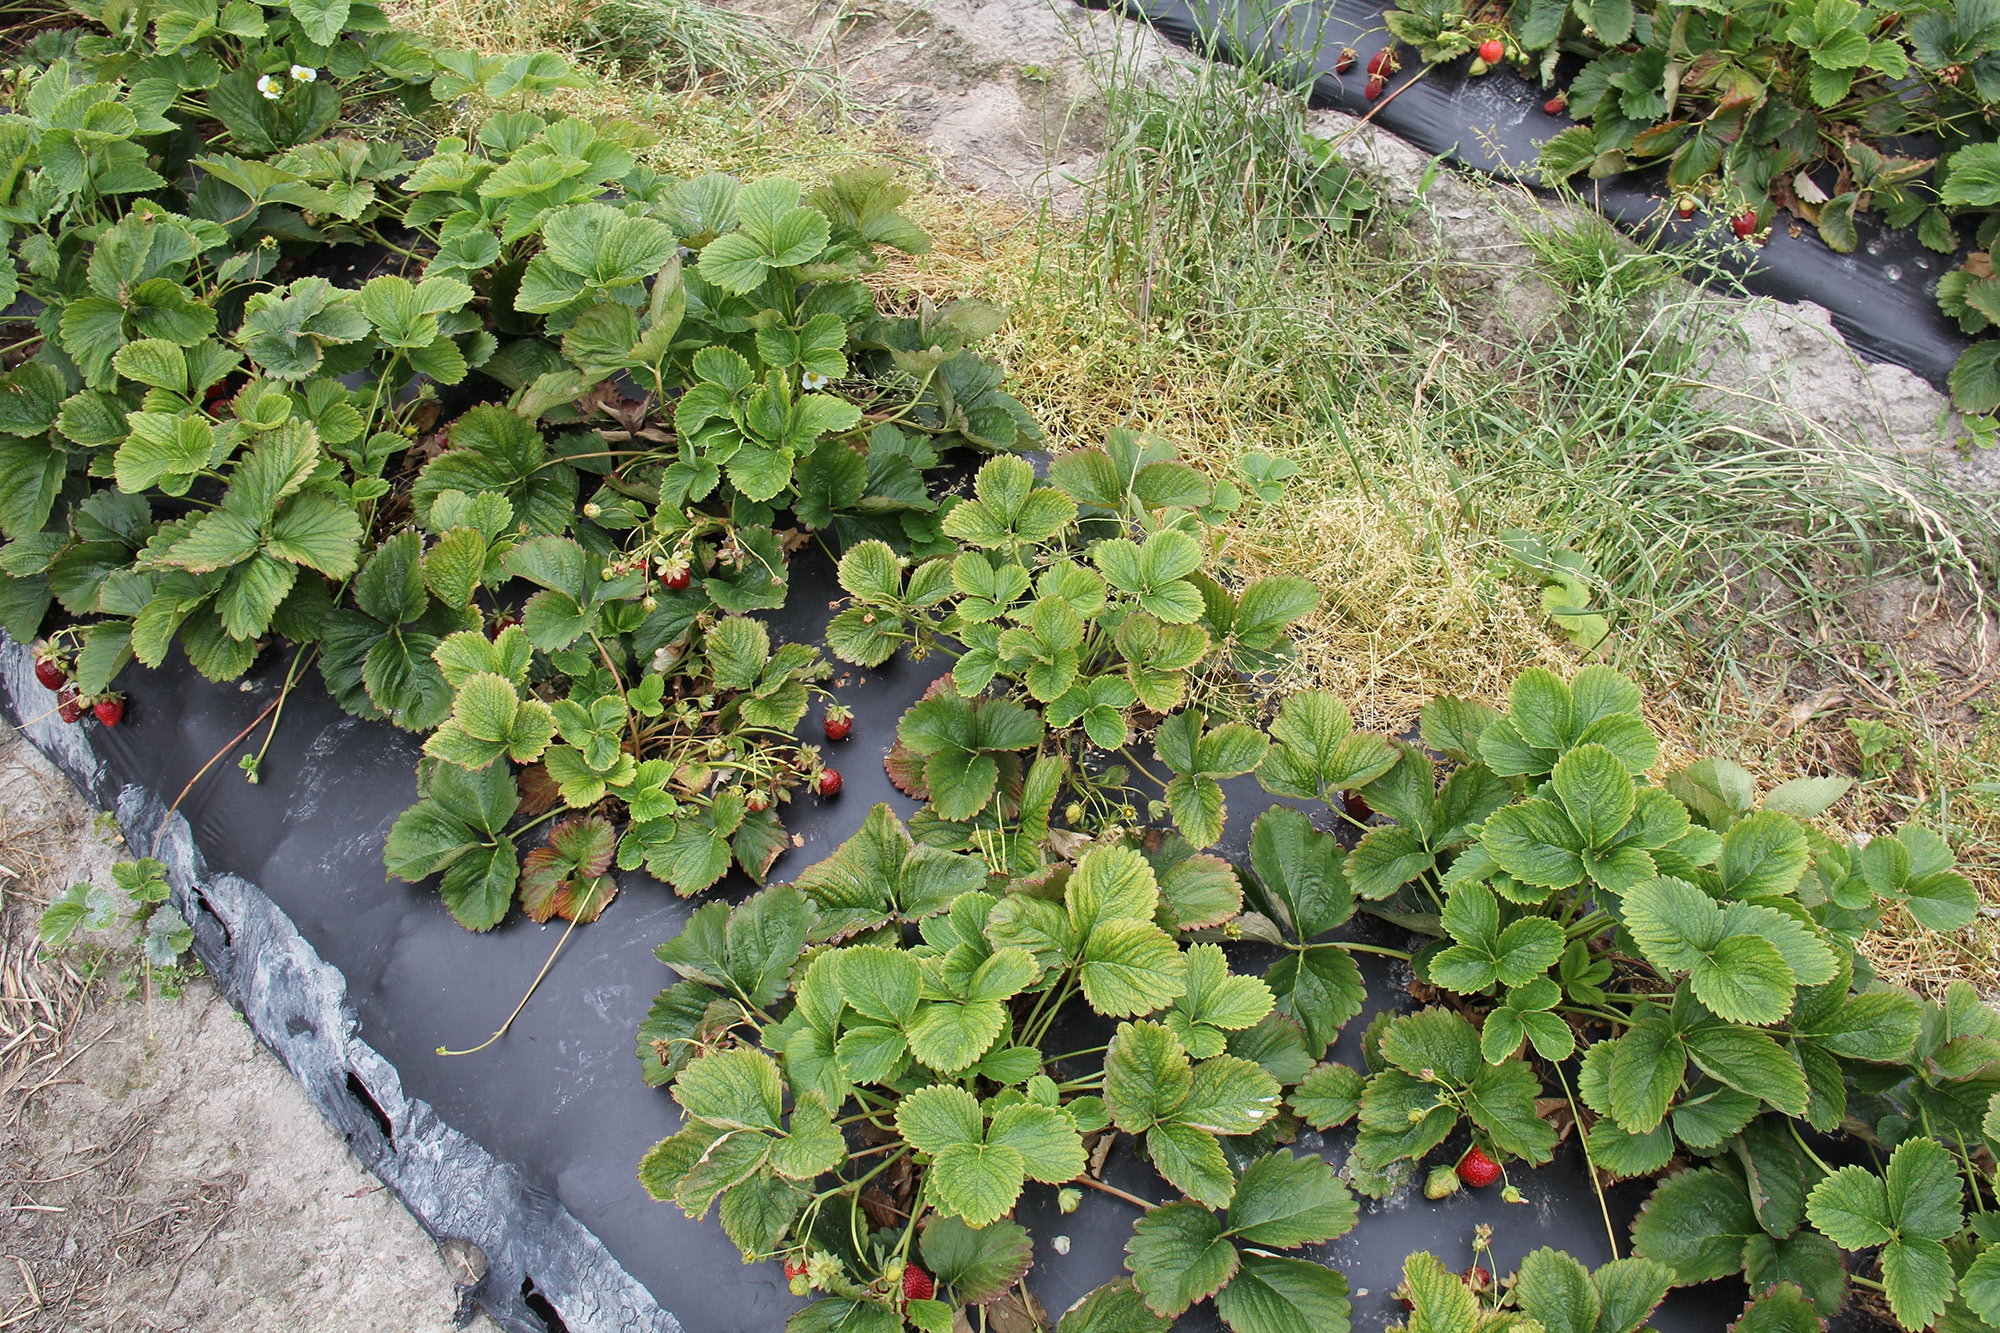 Figure 3. Virus-infected strawberry plants in bloom and fruit.